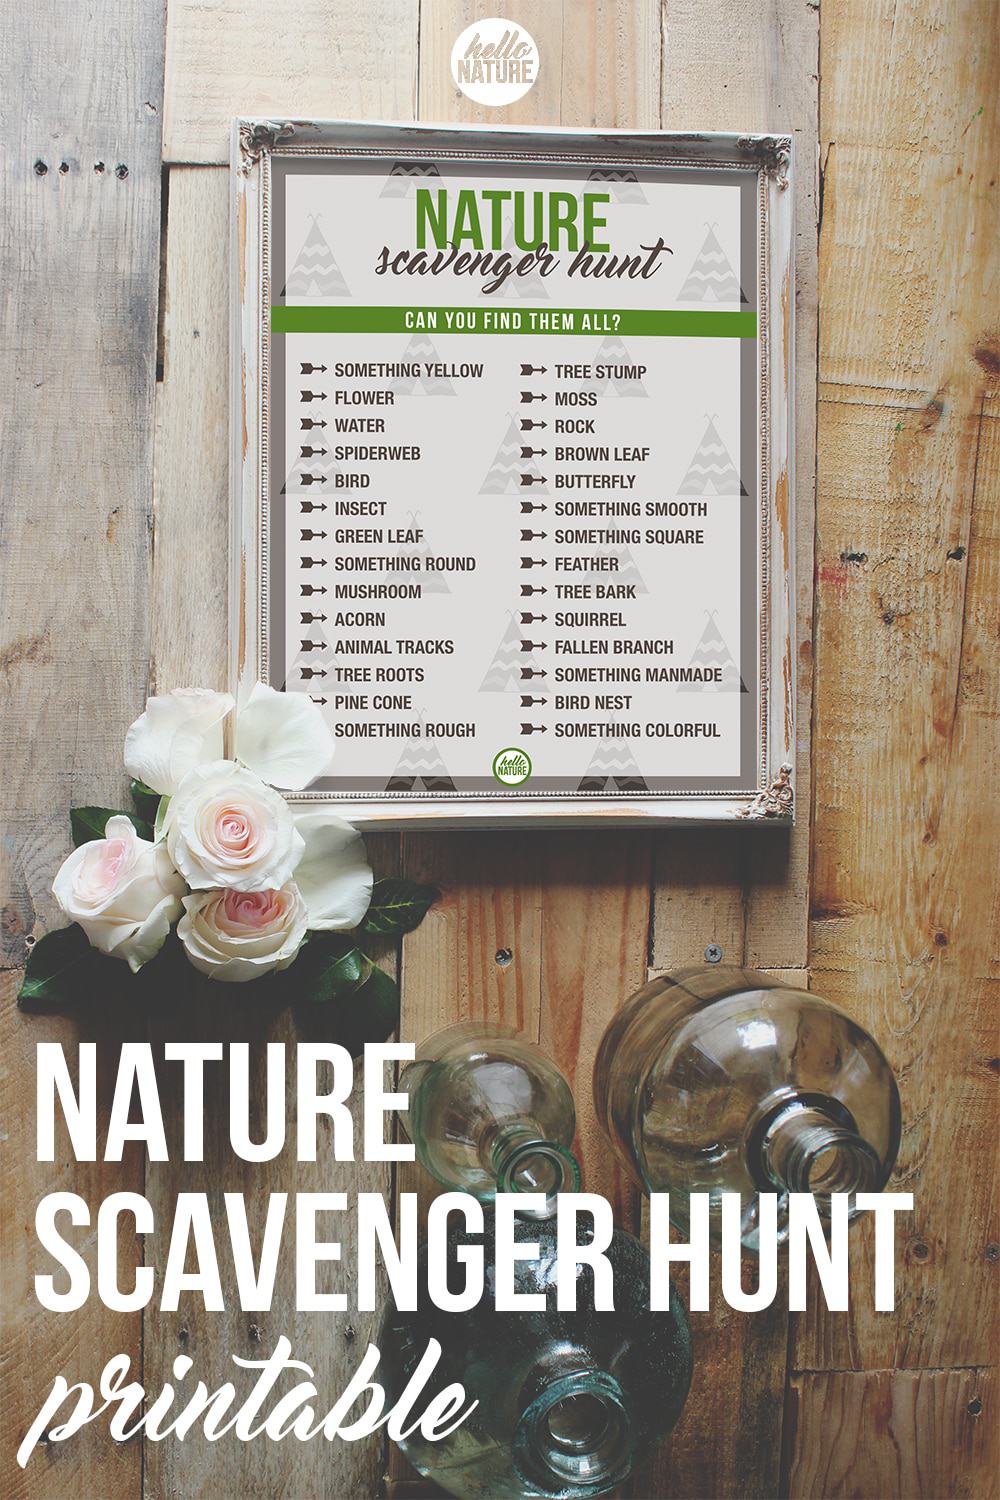 Turn your next hike or camping trip into a game for the whole family! This Nature Scavenger Hunt Printable will keep all explorers on the lookout!